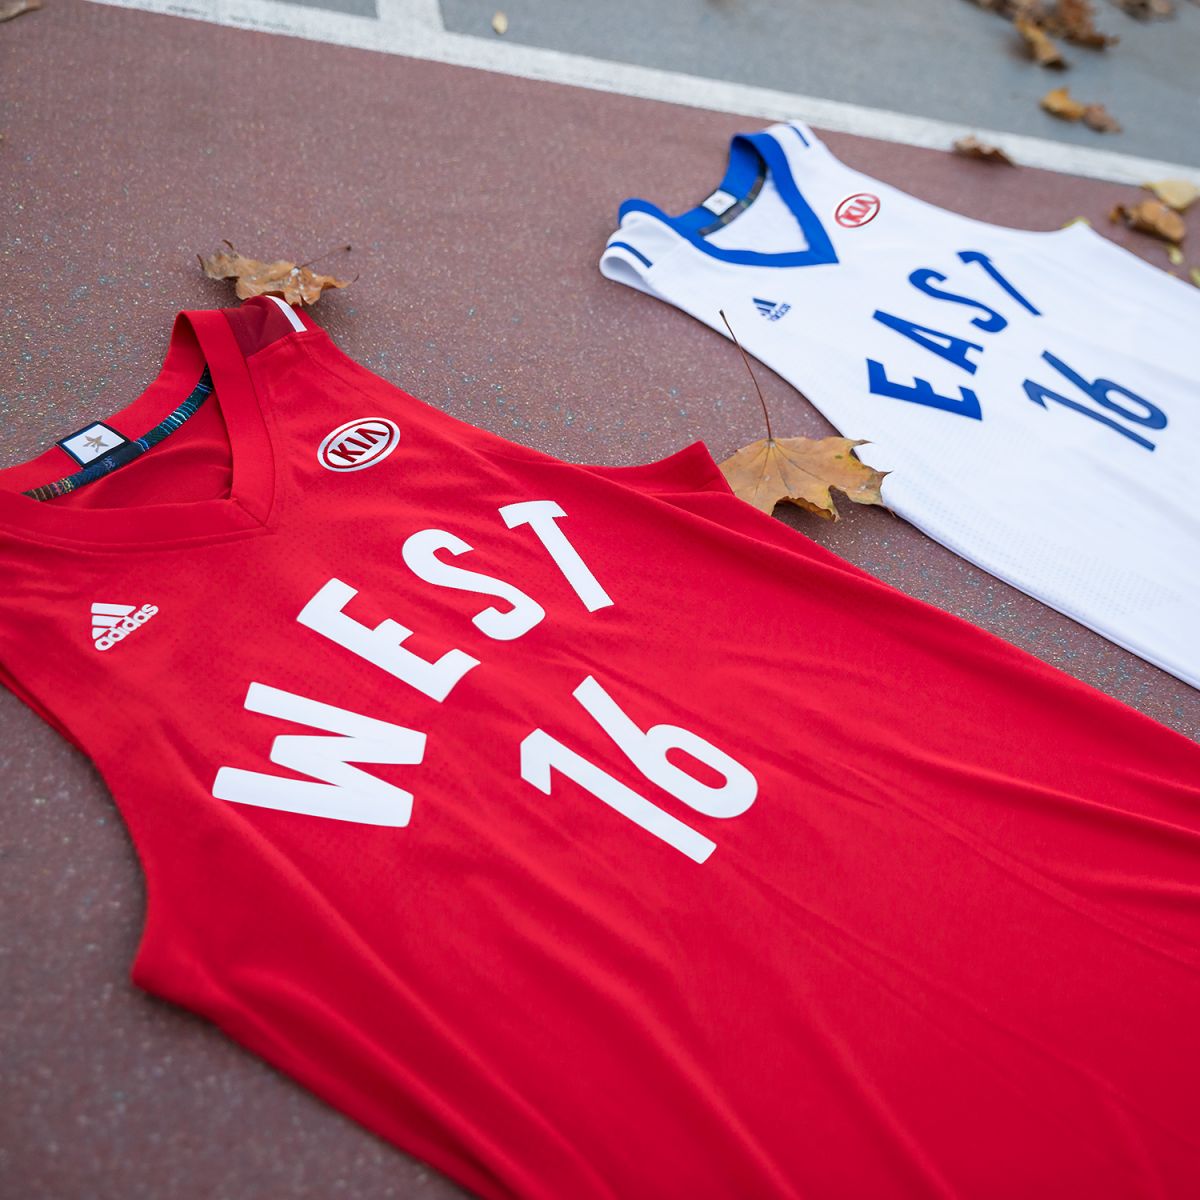 Adidas And The NBA Unveil 2015 NBA All-Star Jerseys